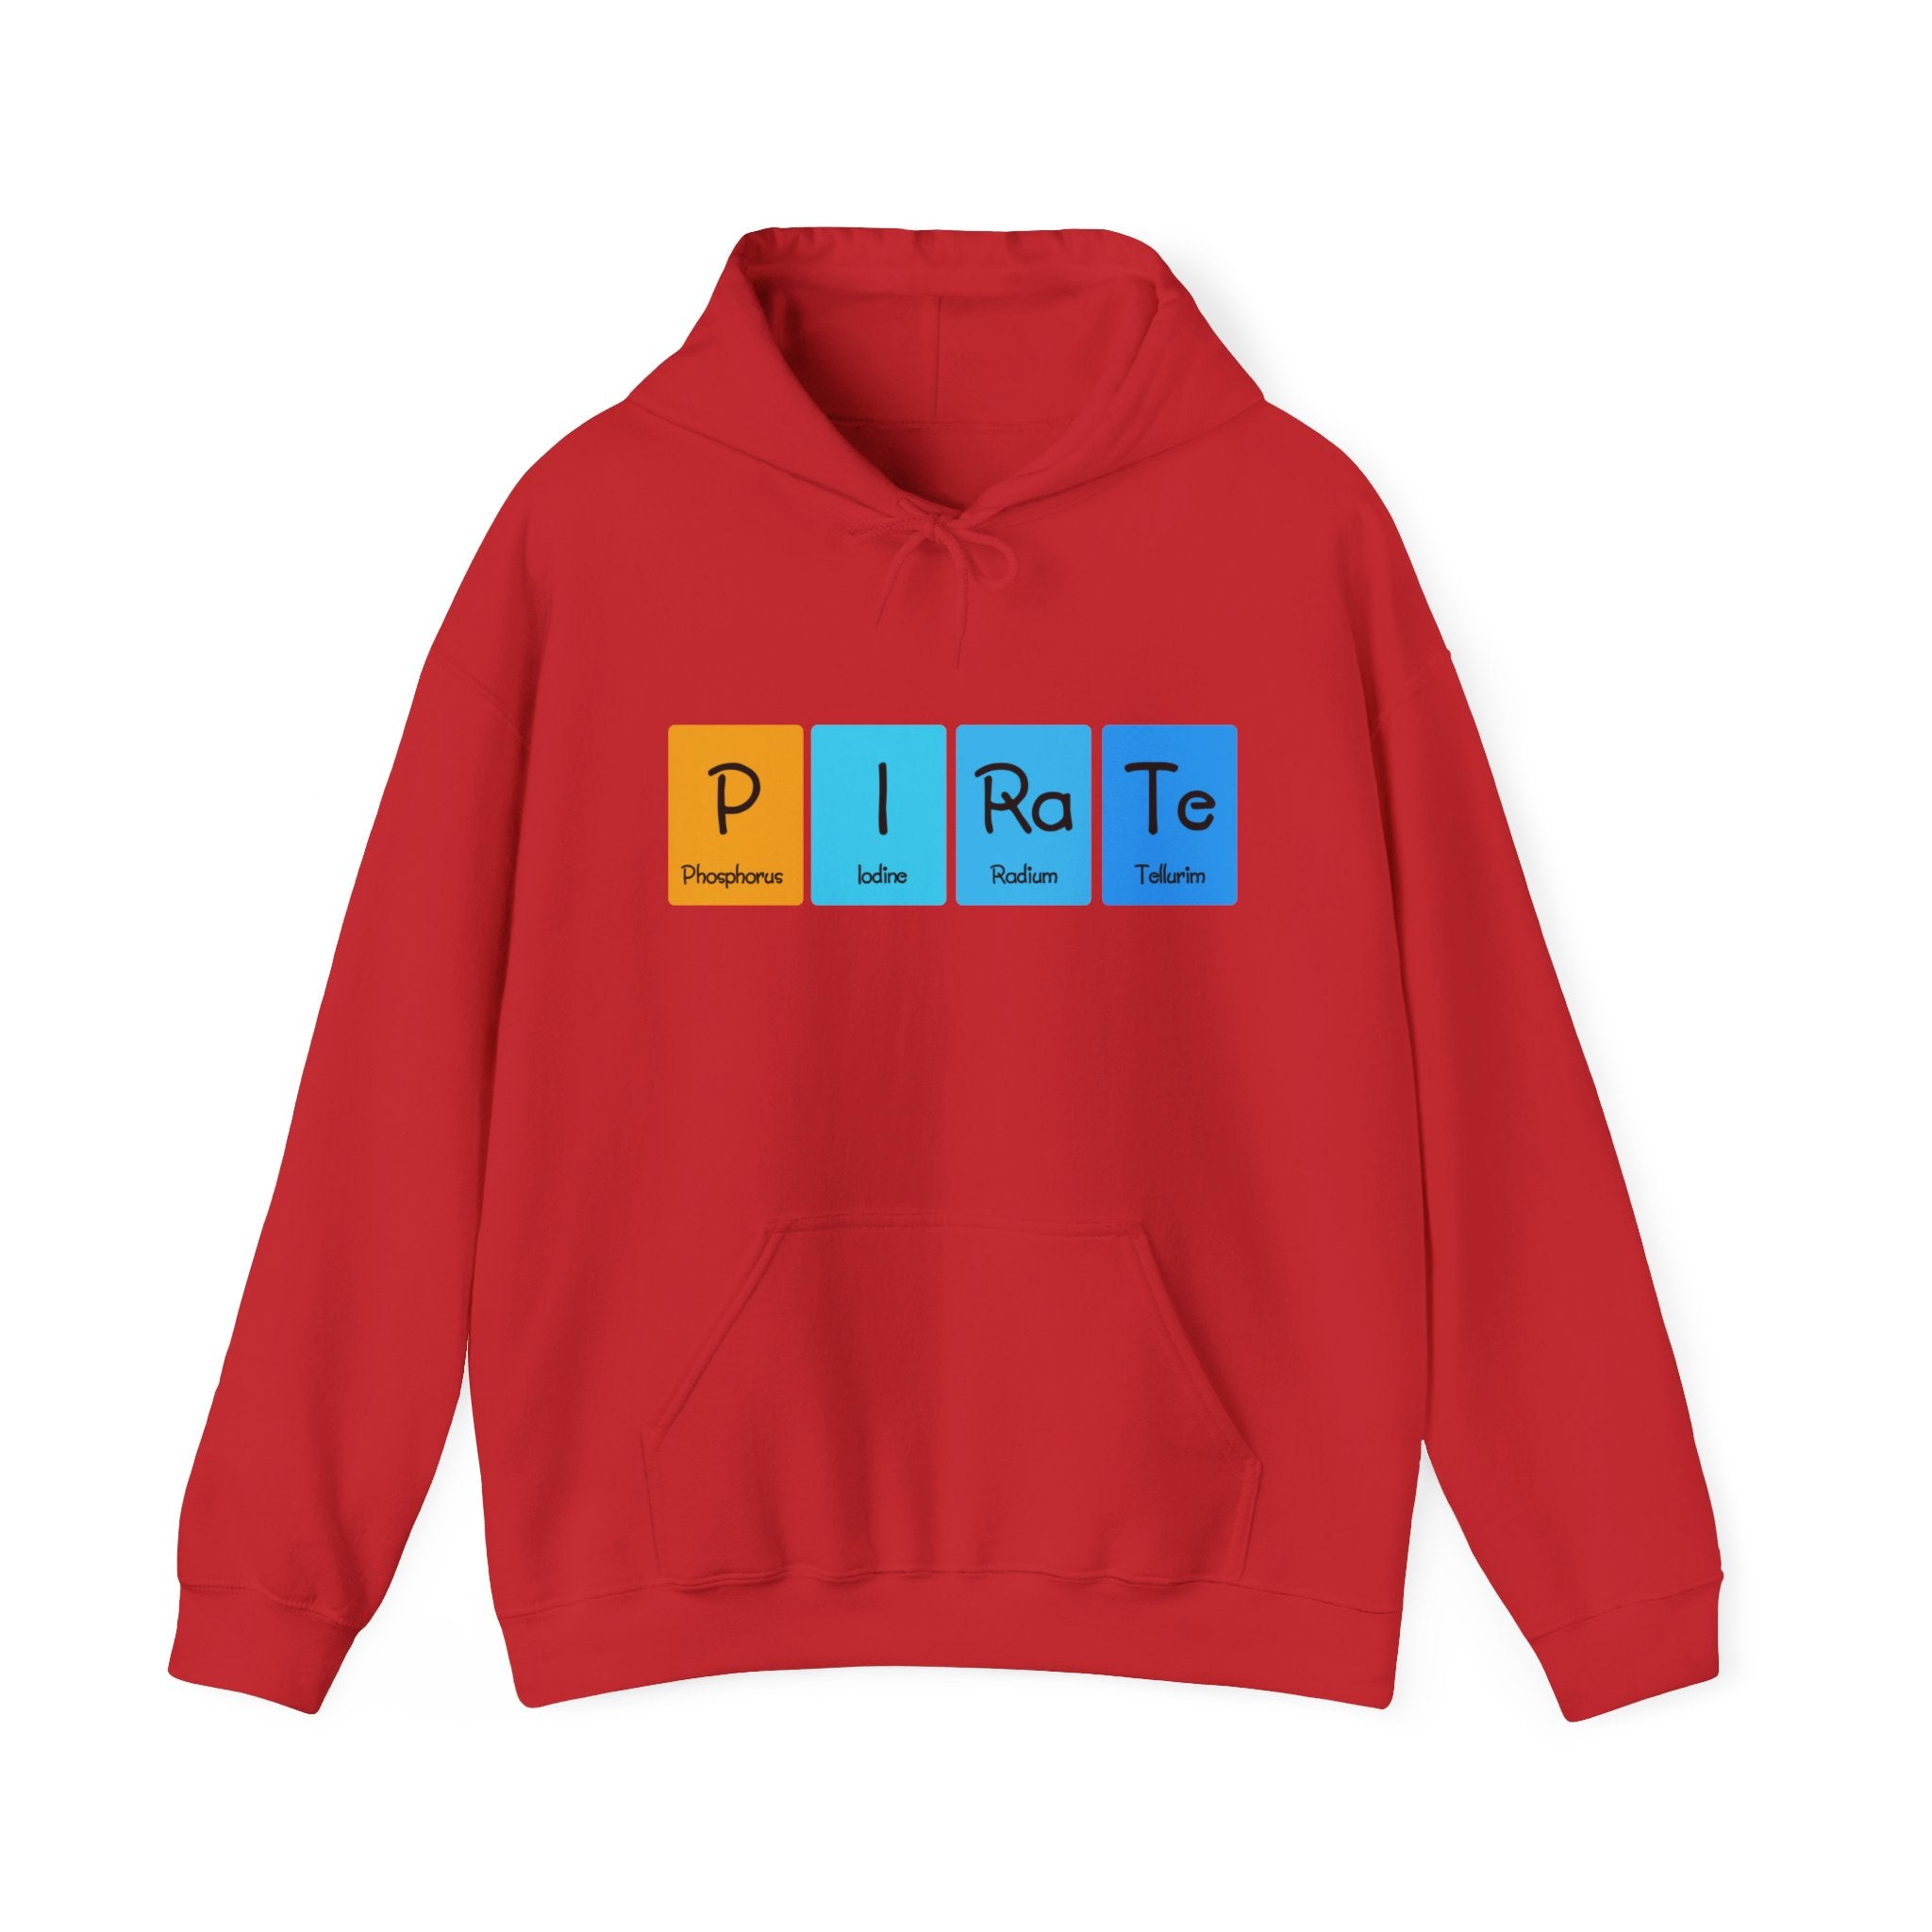 A P-I-Ra-Te - Hooded Sweatshirt in red, boasting "PIRATE" on the front with colored blocks styled like periodic table elements: Phosphorus, Iodine, Radium, Tellurium. This hoodie combines comfort and style effortlessly.